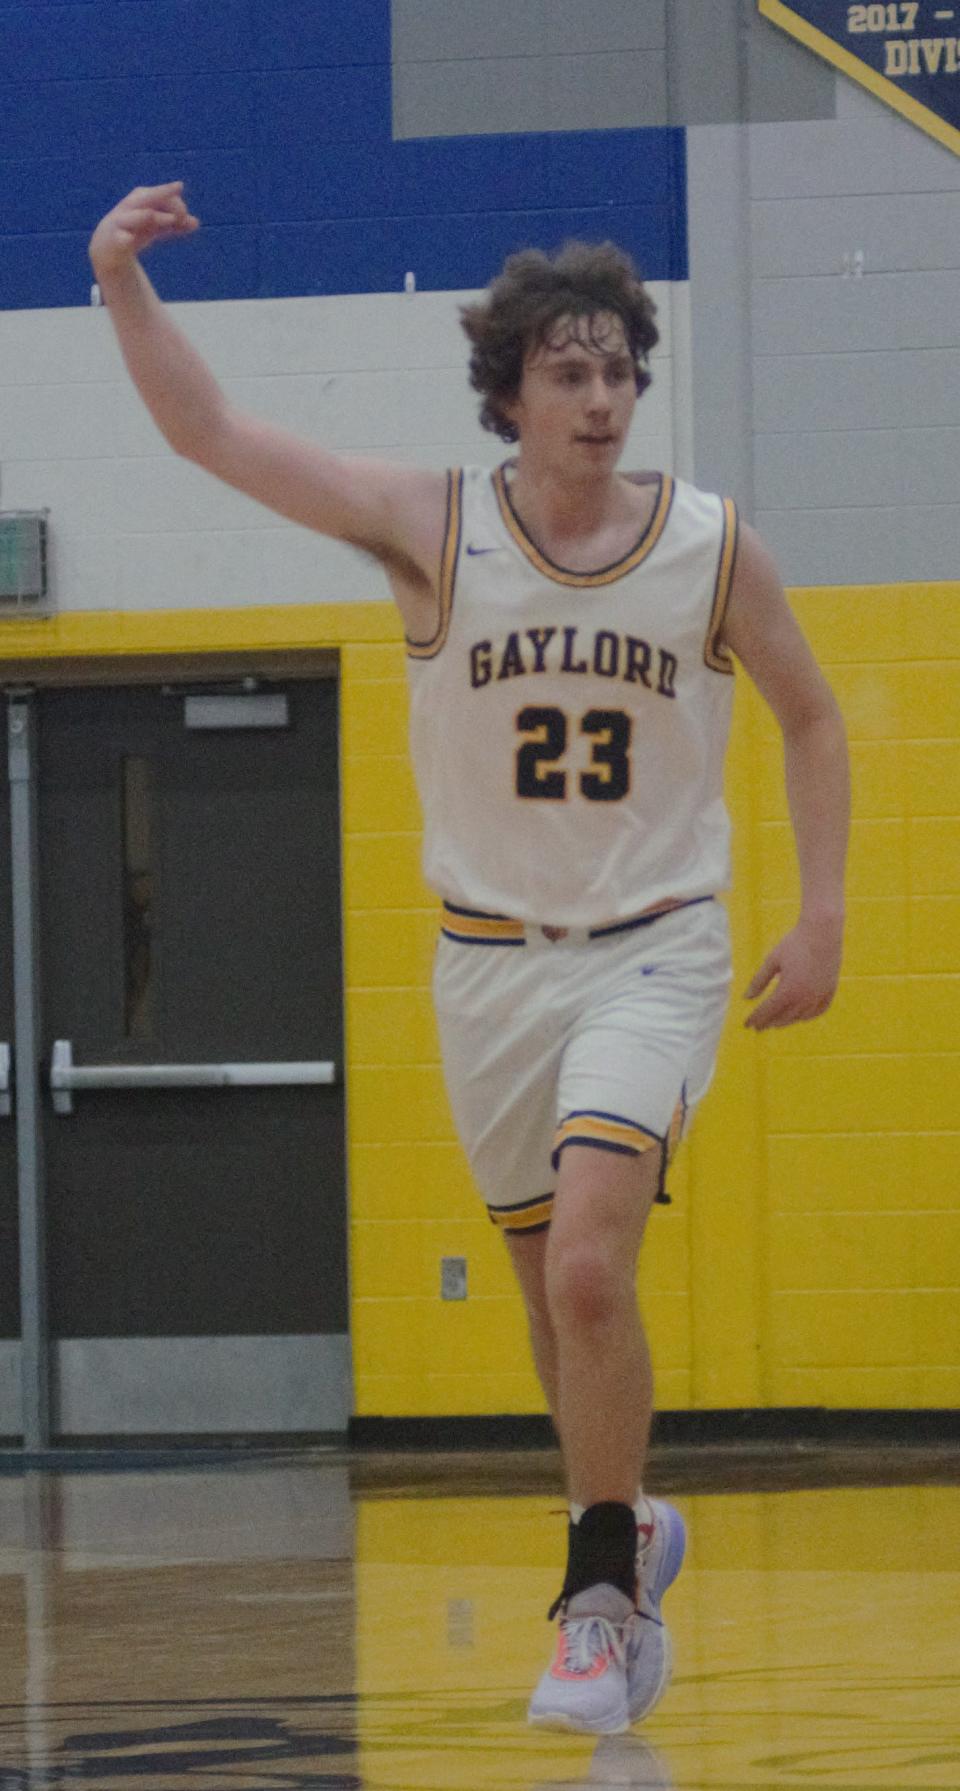 Luke Enders celebrates a 3-pointer during a basketball matchup between Gaylord and Charlevoix on Tuesday, December 6 in Gaylord, Mich.